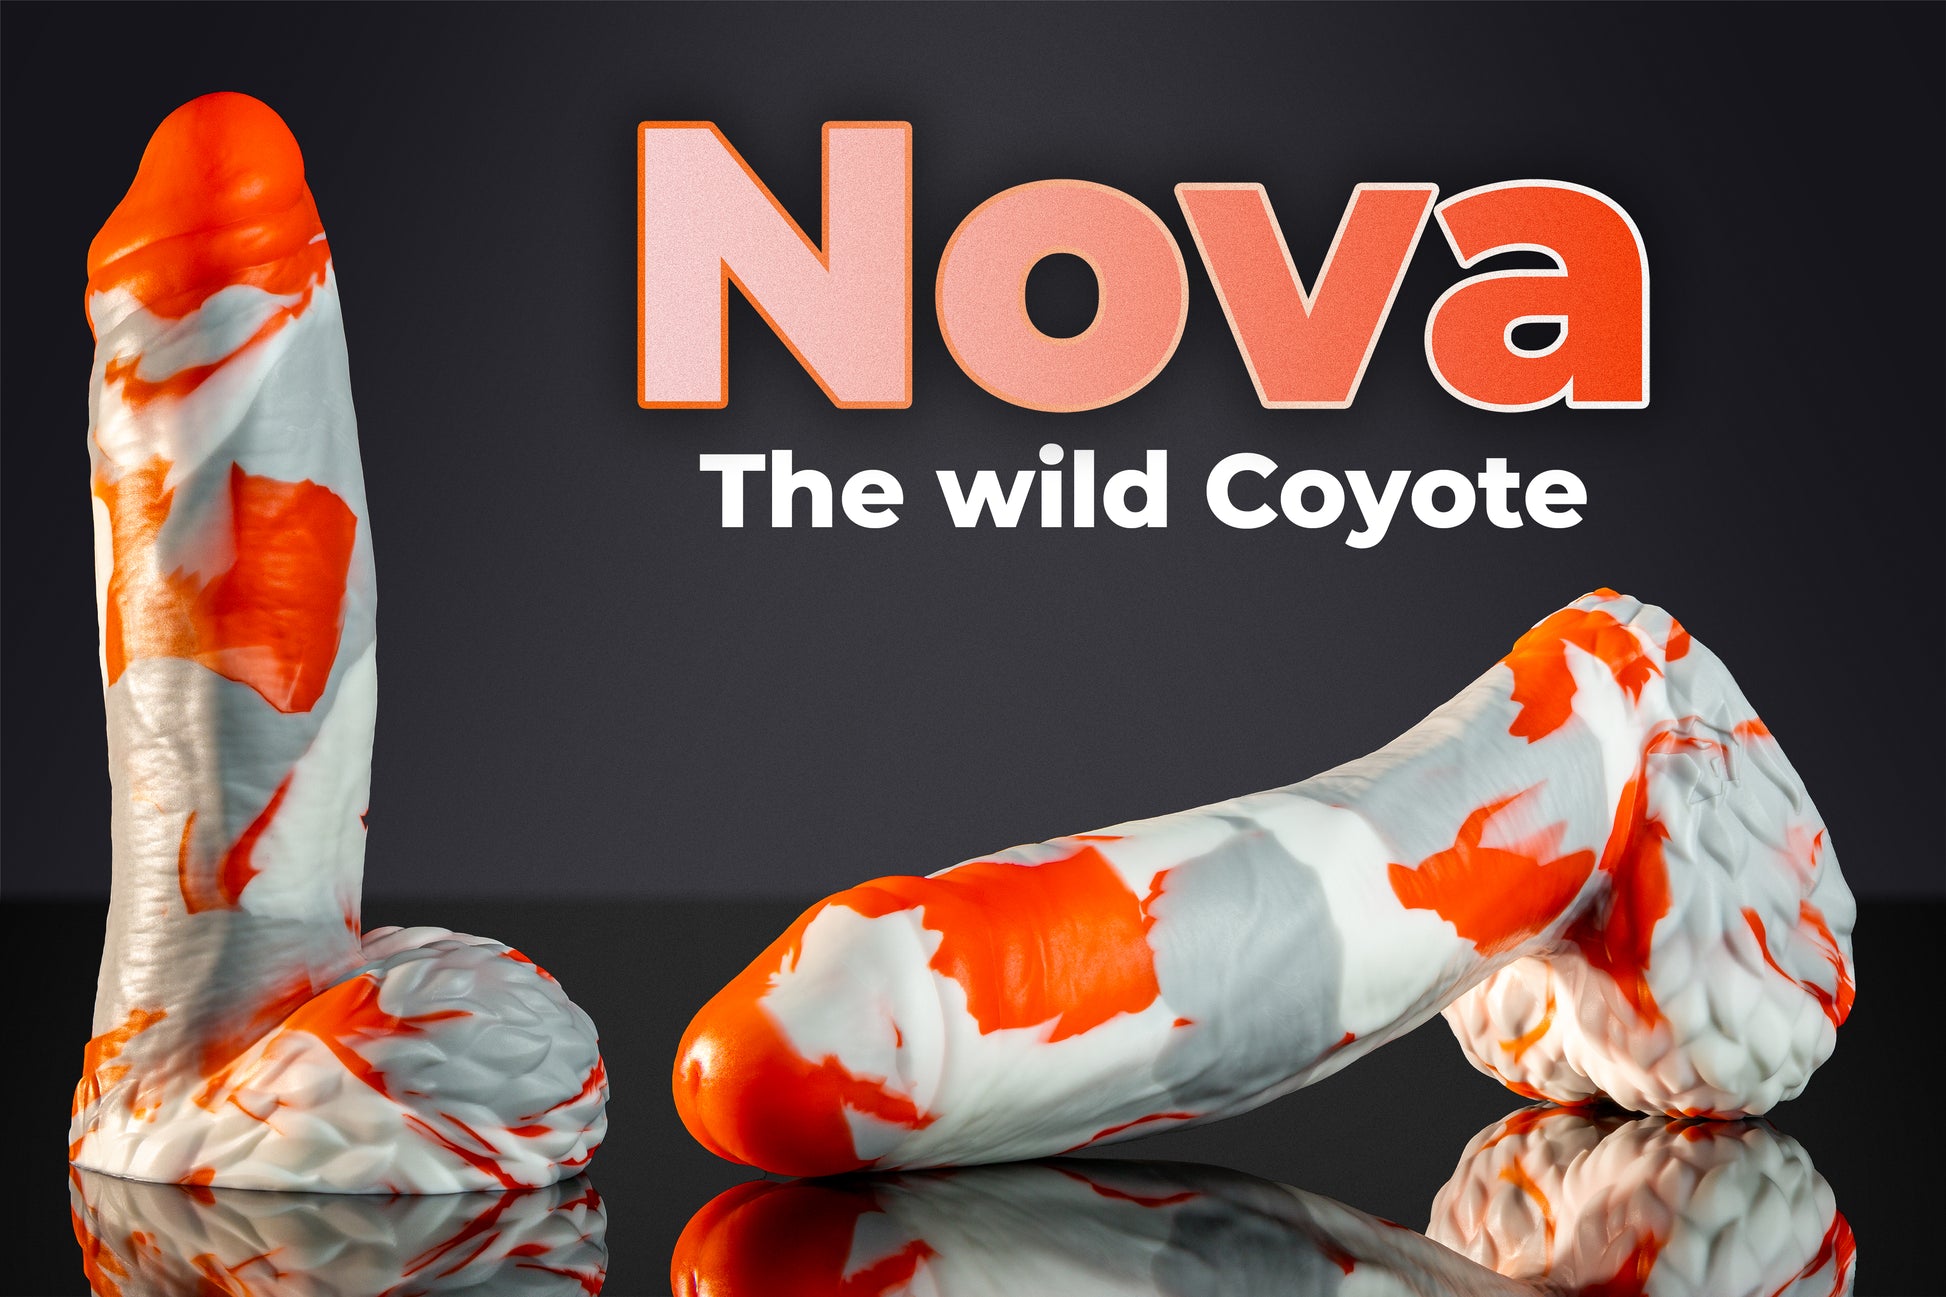 nova the coyote product image with product name